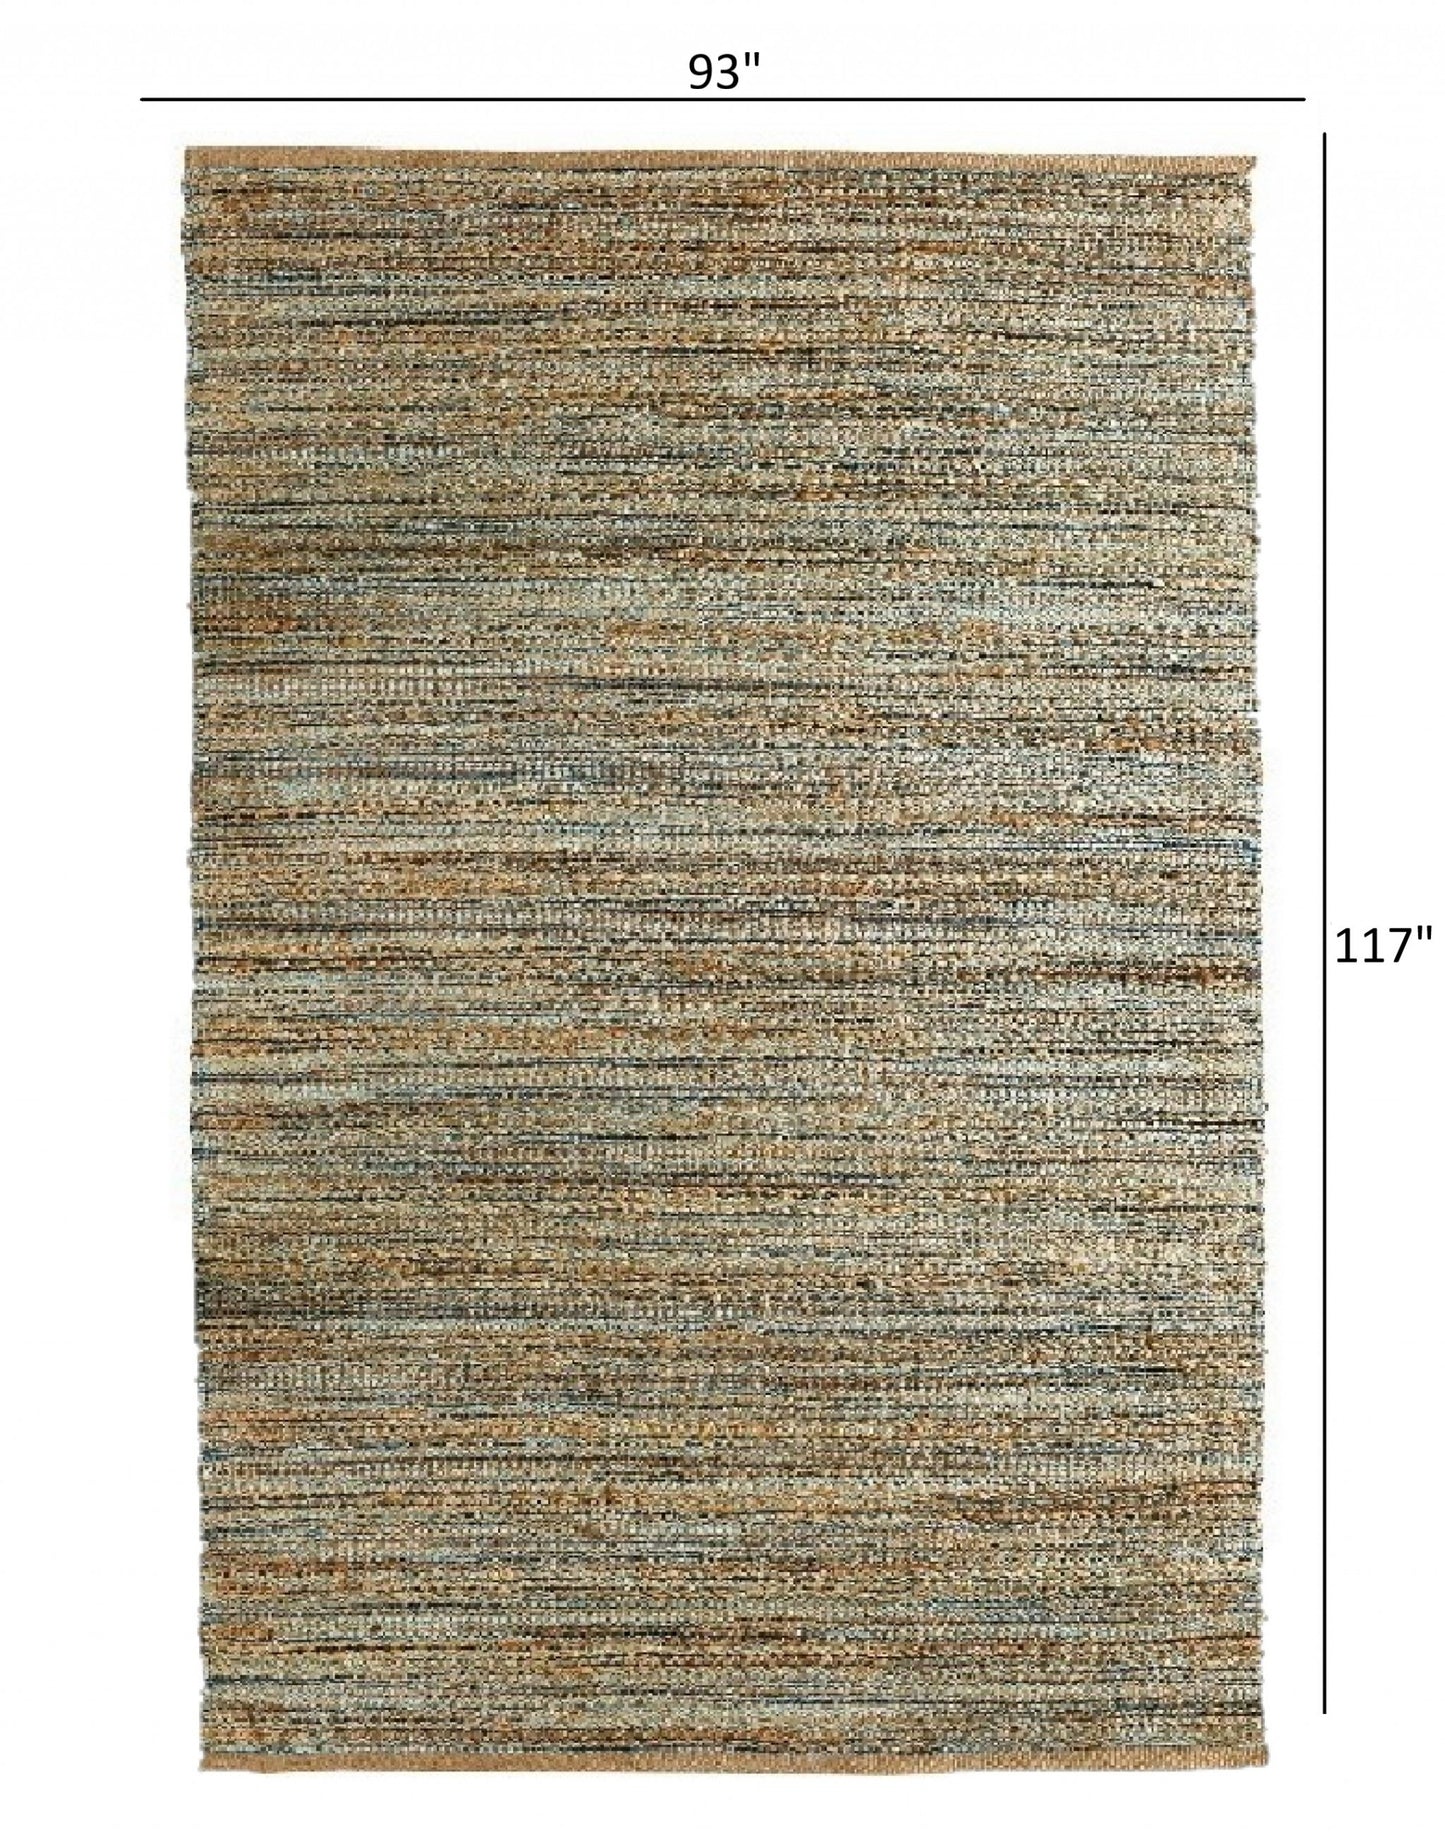 5’ x 8’ Teal and Natural Braided Jute Area Rug